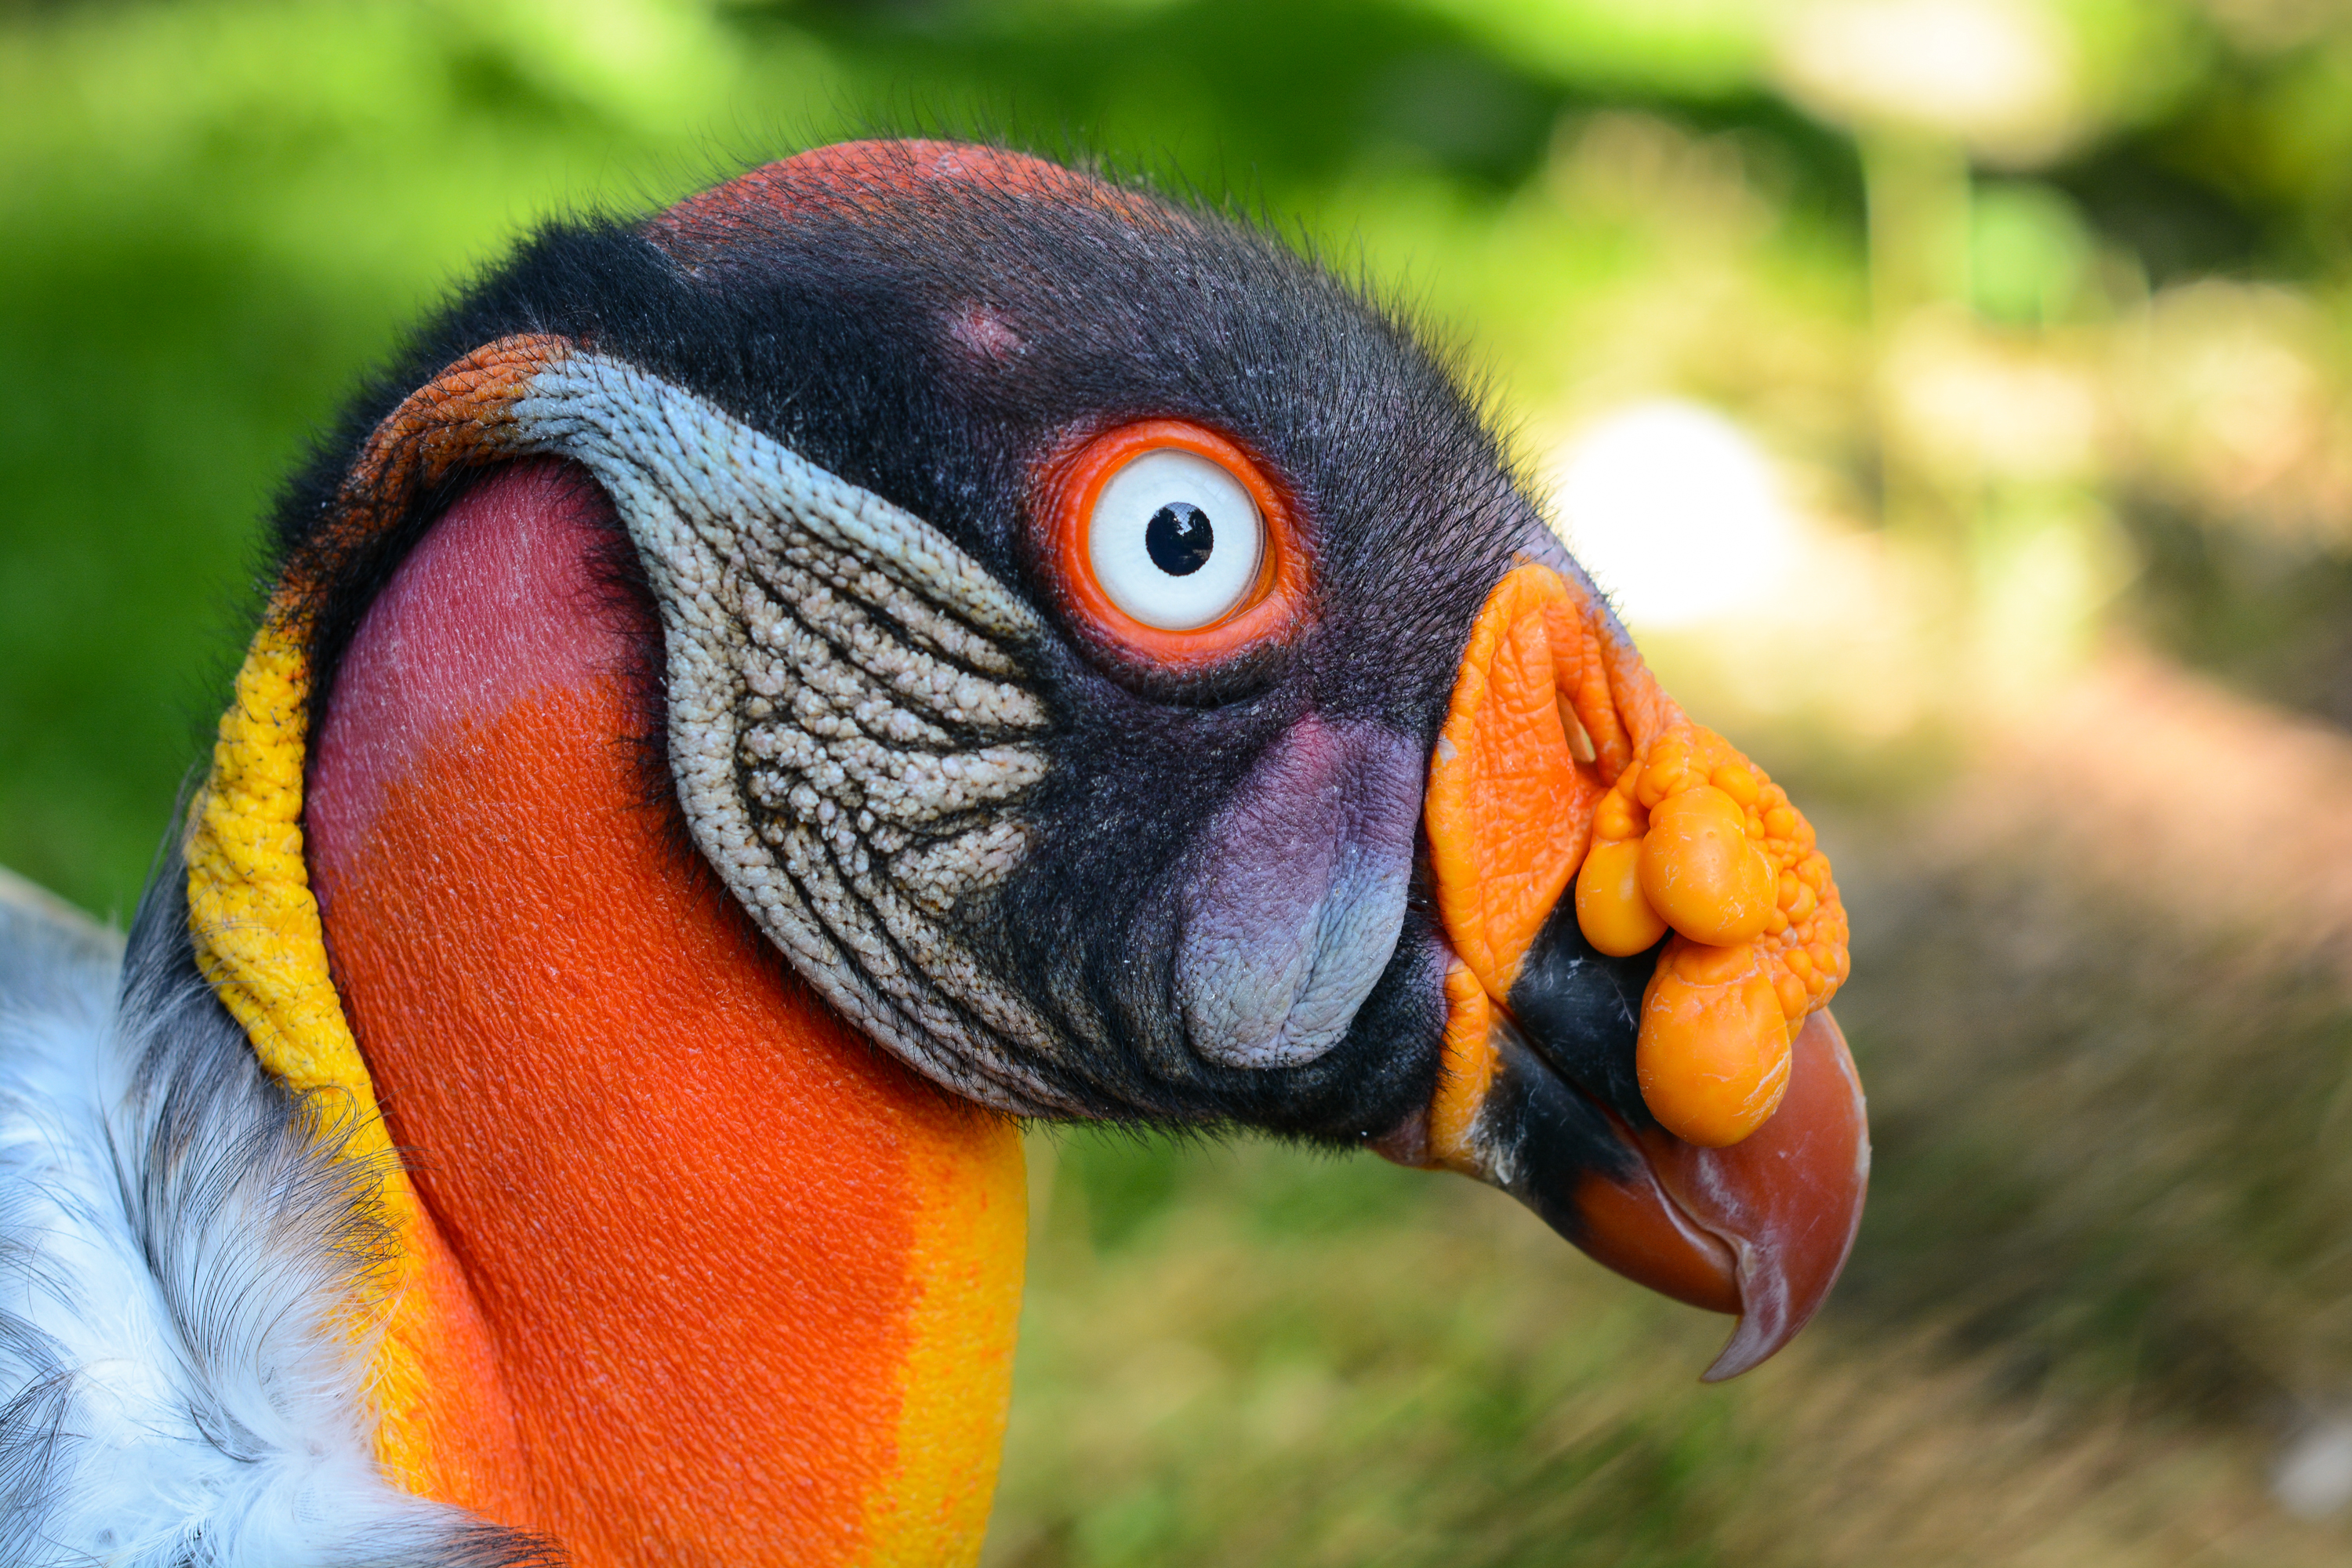 King vulture photo